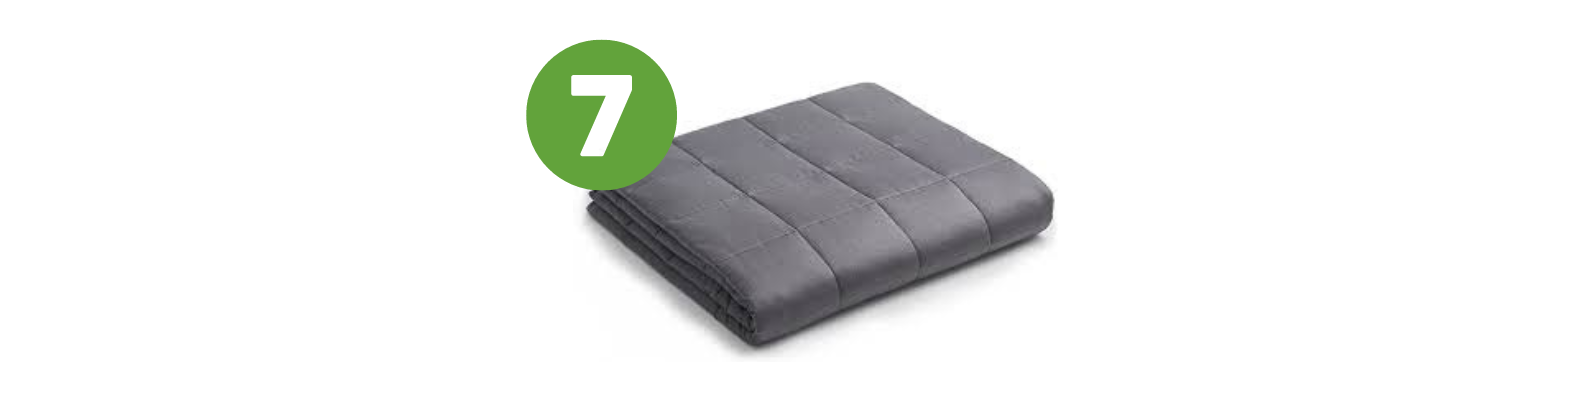 2022 Holiday gift guide - weighted blanket